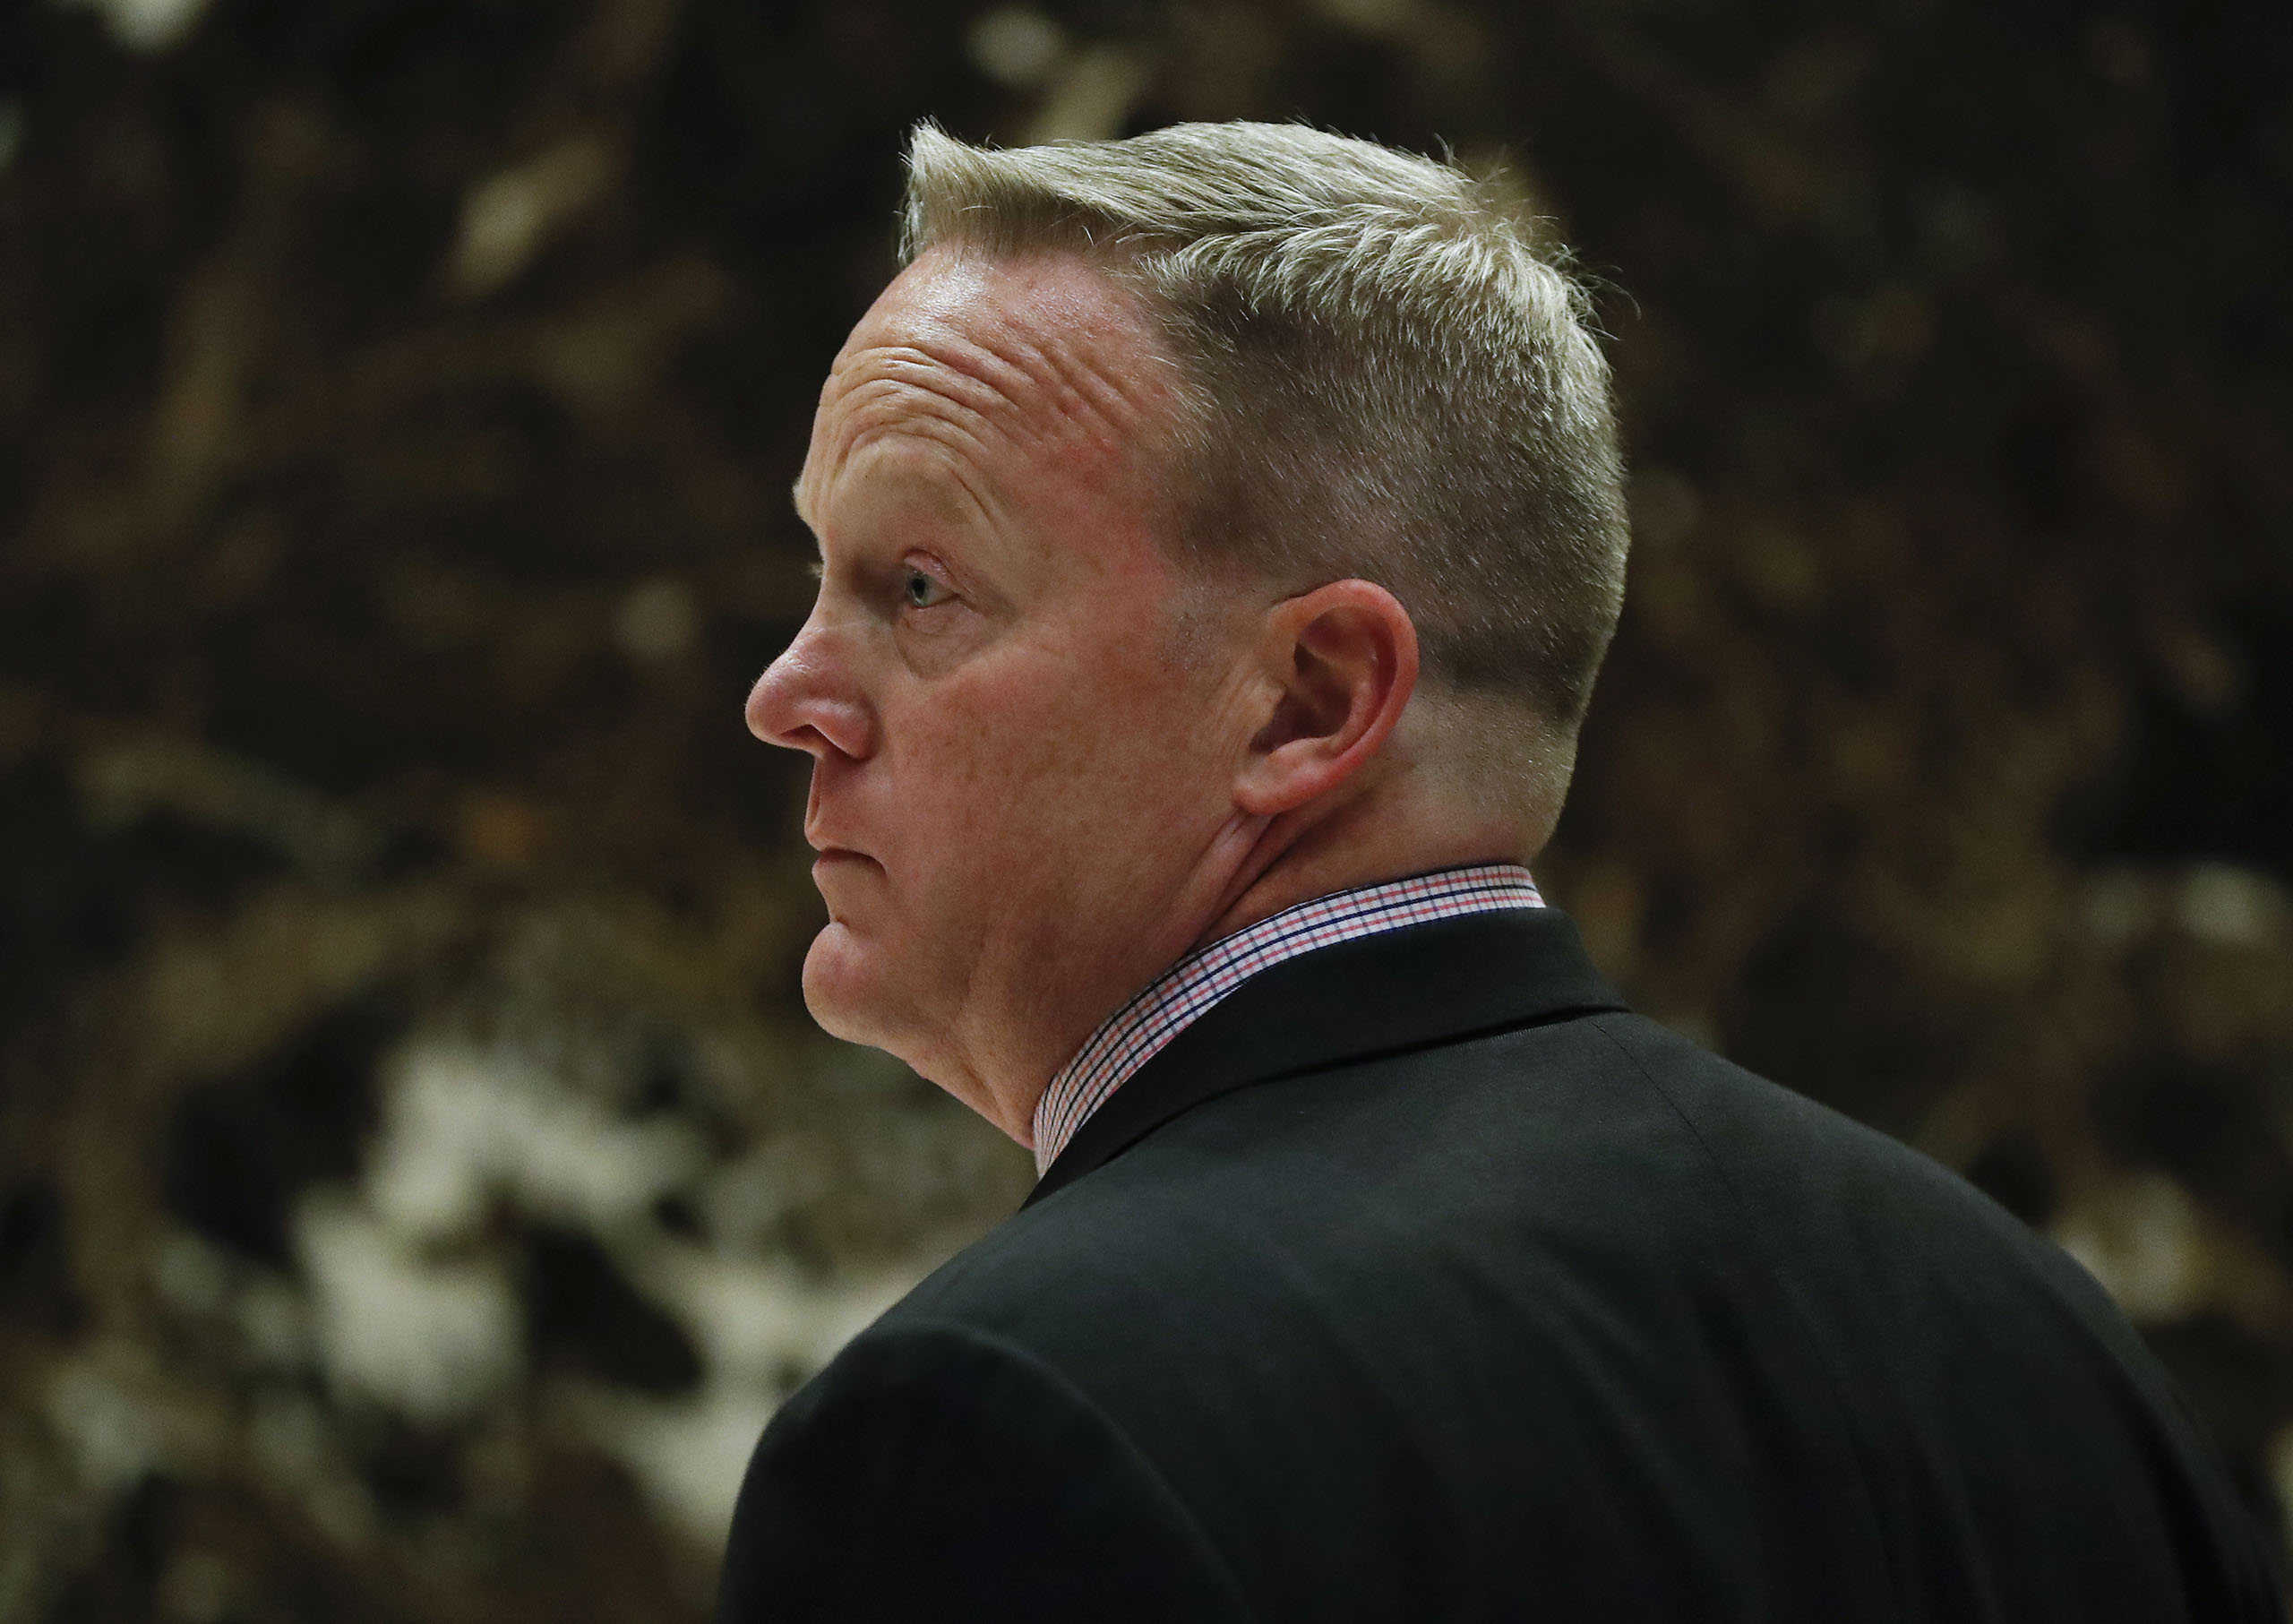 Sean Spicer, Republican National Committee communications director and chief strategist, waits for an elevator as he arrives at Trump Tower, in New York on Nov. 16, 2016. (Carolyn Kaster—AP)